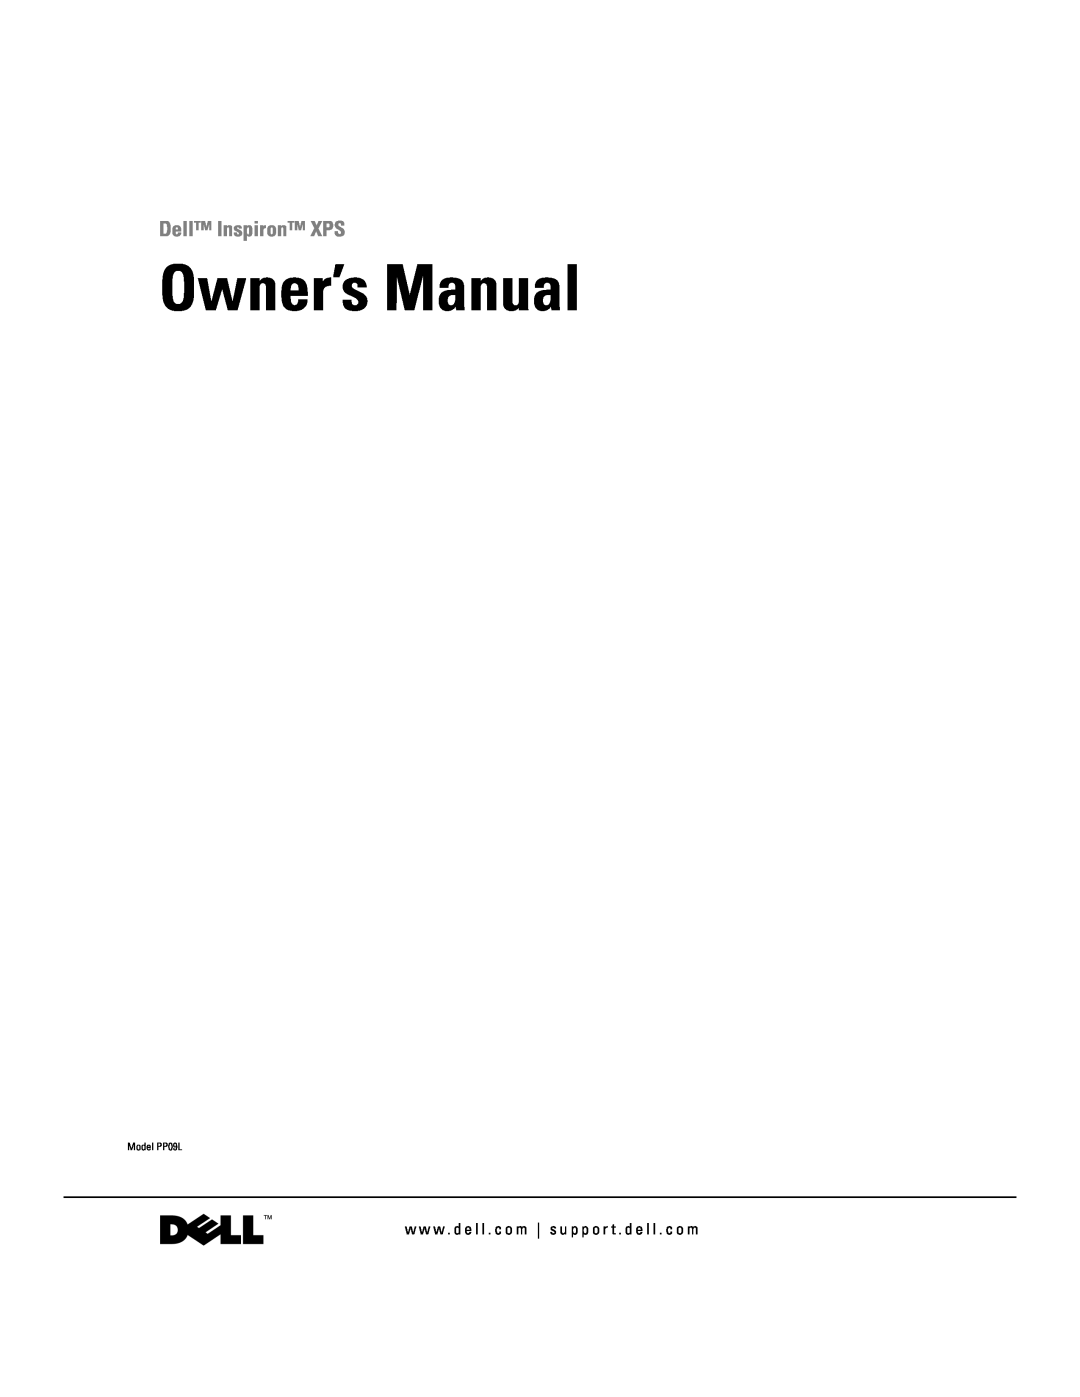 Dell owner manual Owner’s Manual, Dell Inspiron XPS, Model PP09L 